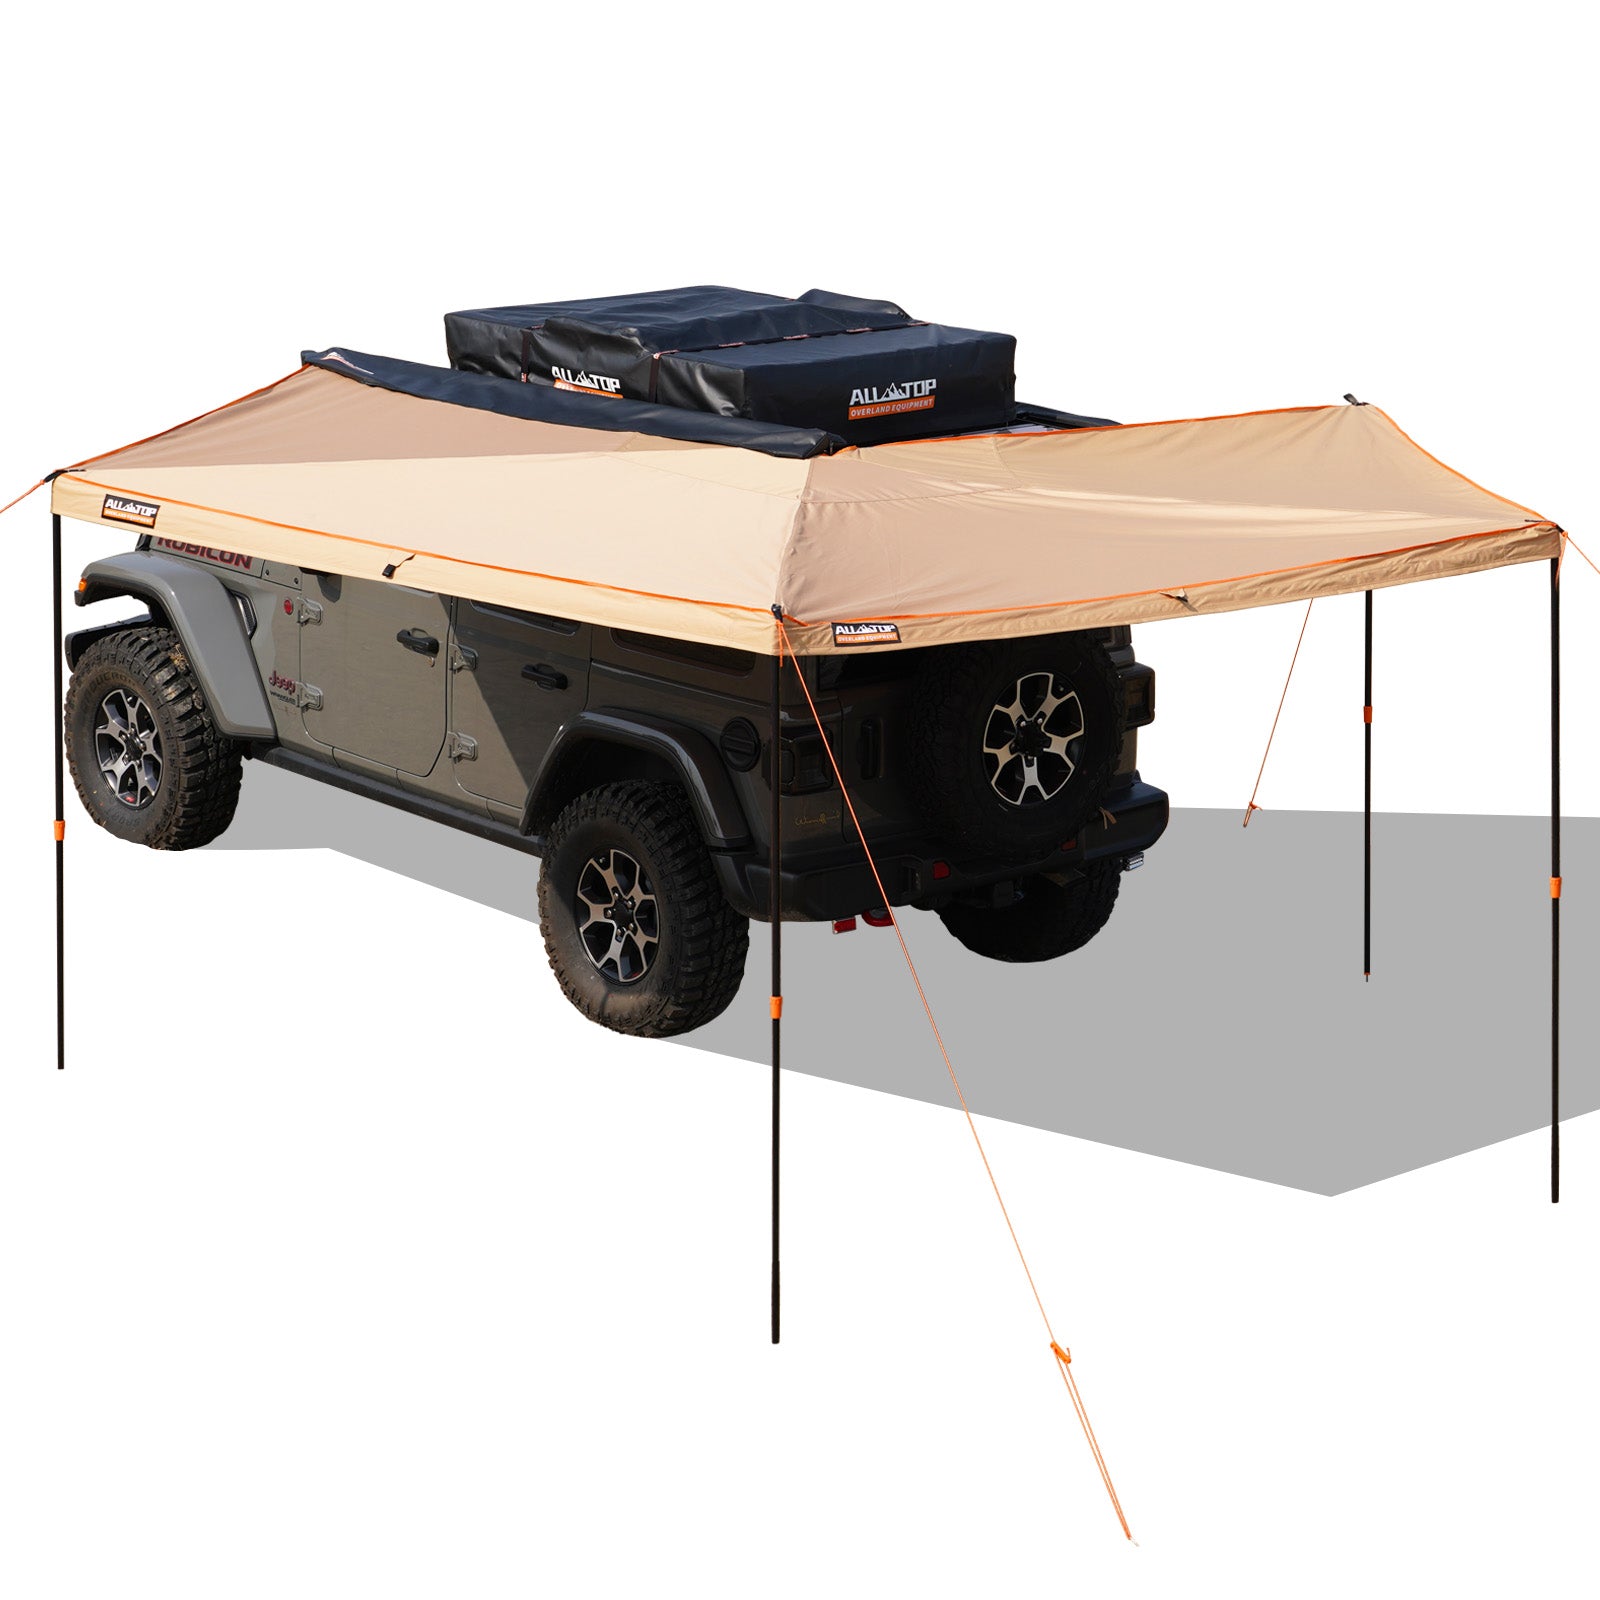 ALL-TOP Rooftop Vehicle Awning 270 Degree- 8.2ft